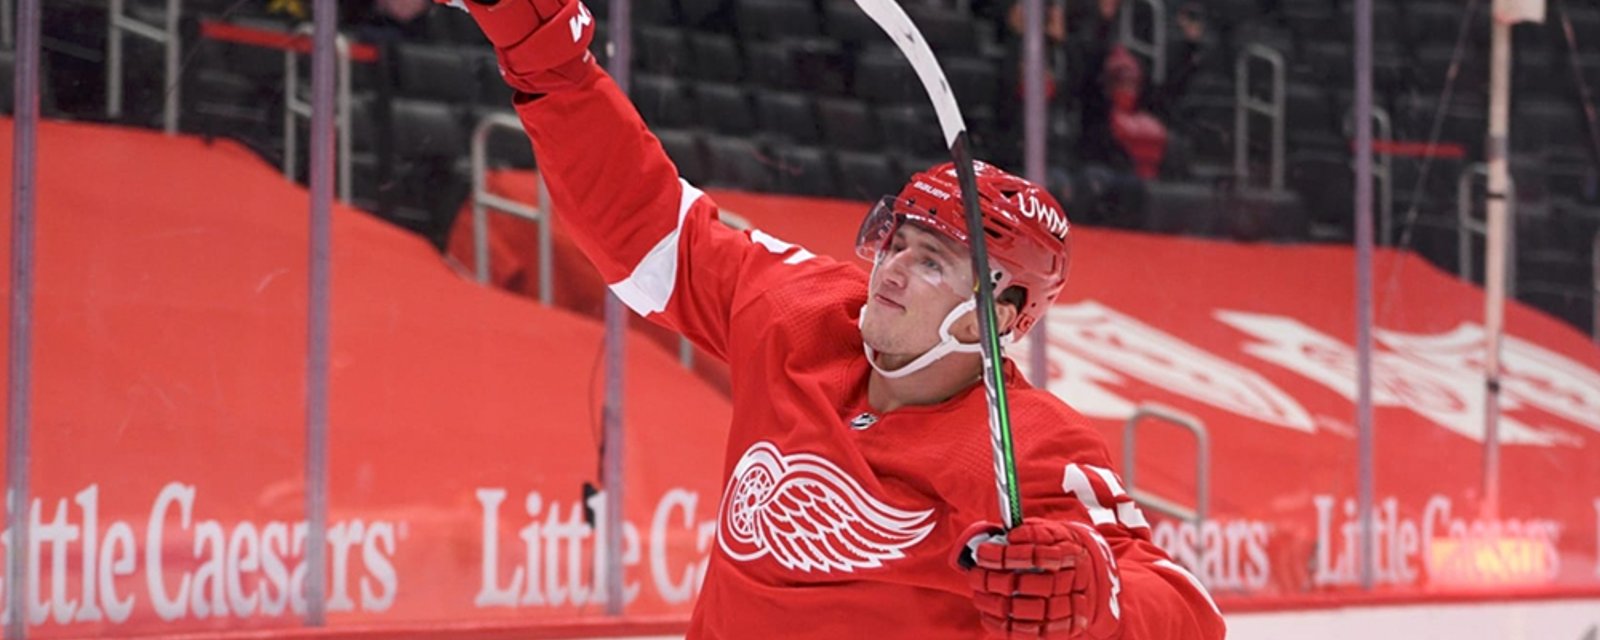 Newly re-signed forward Jakub Vrana happy to remain with Red Wings